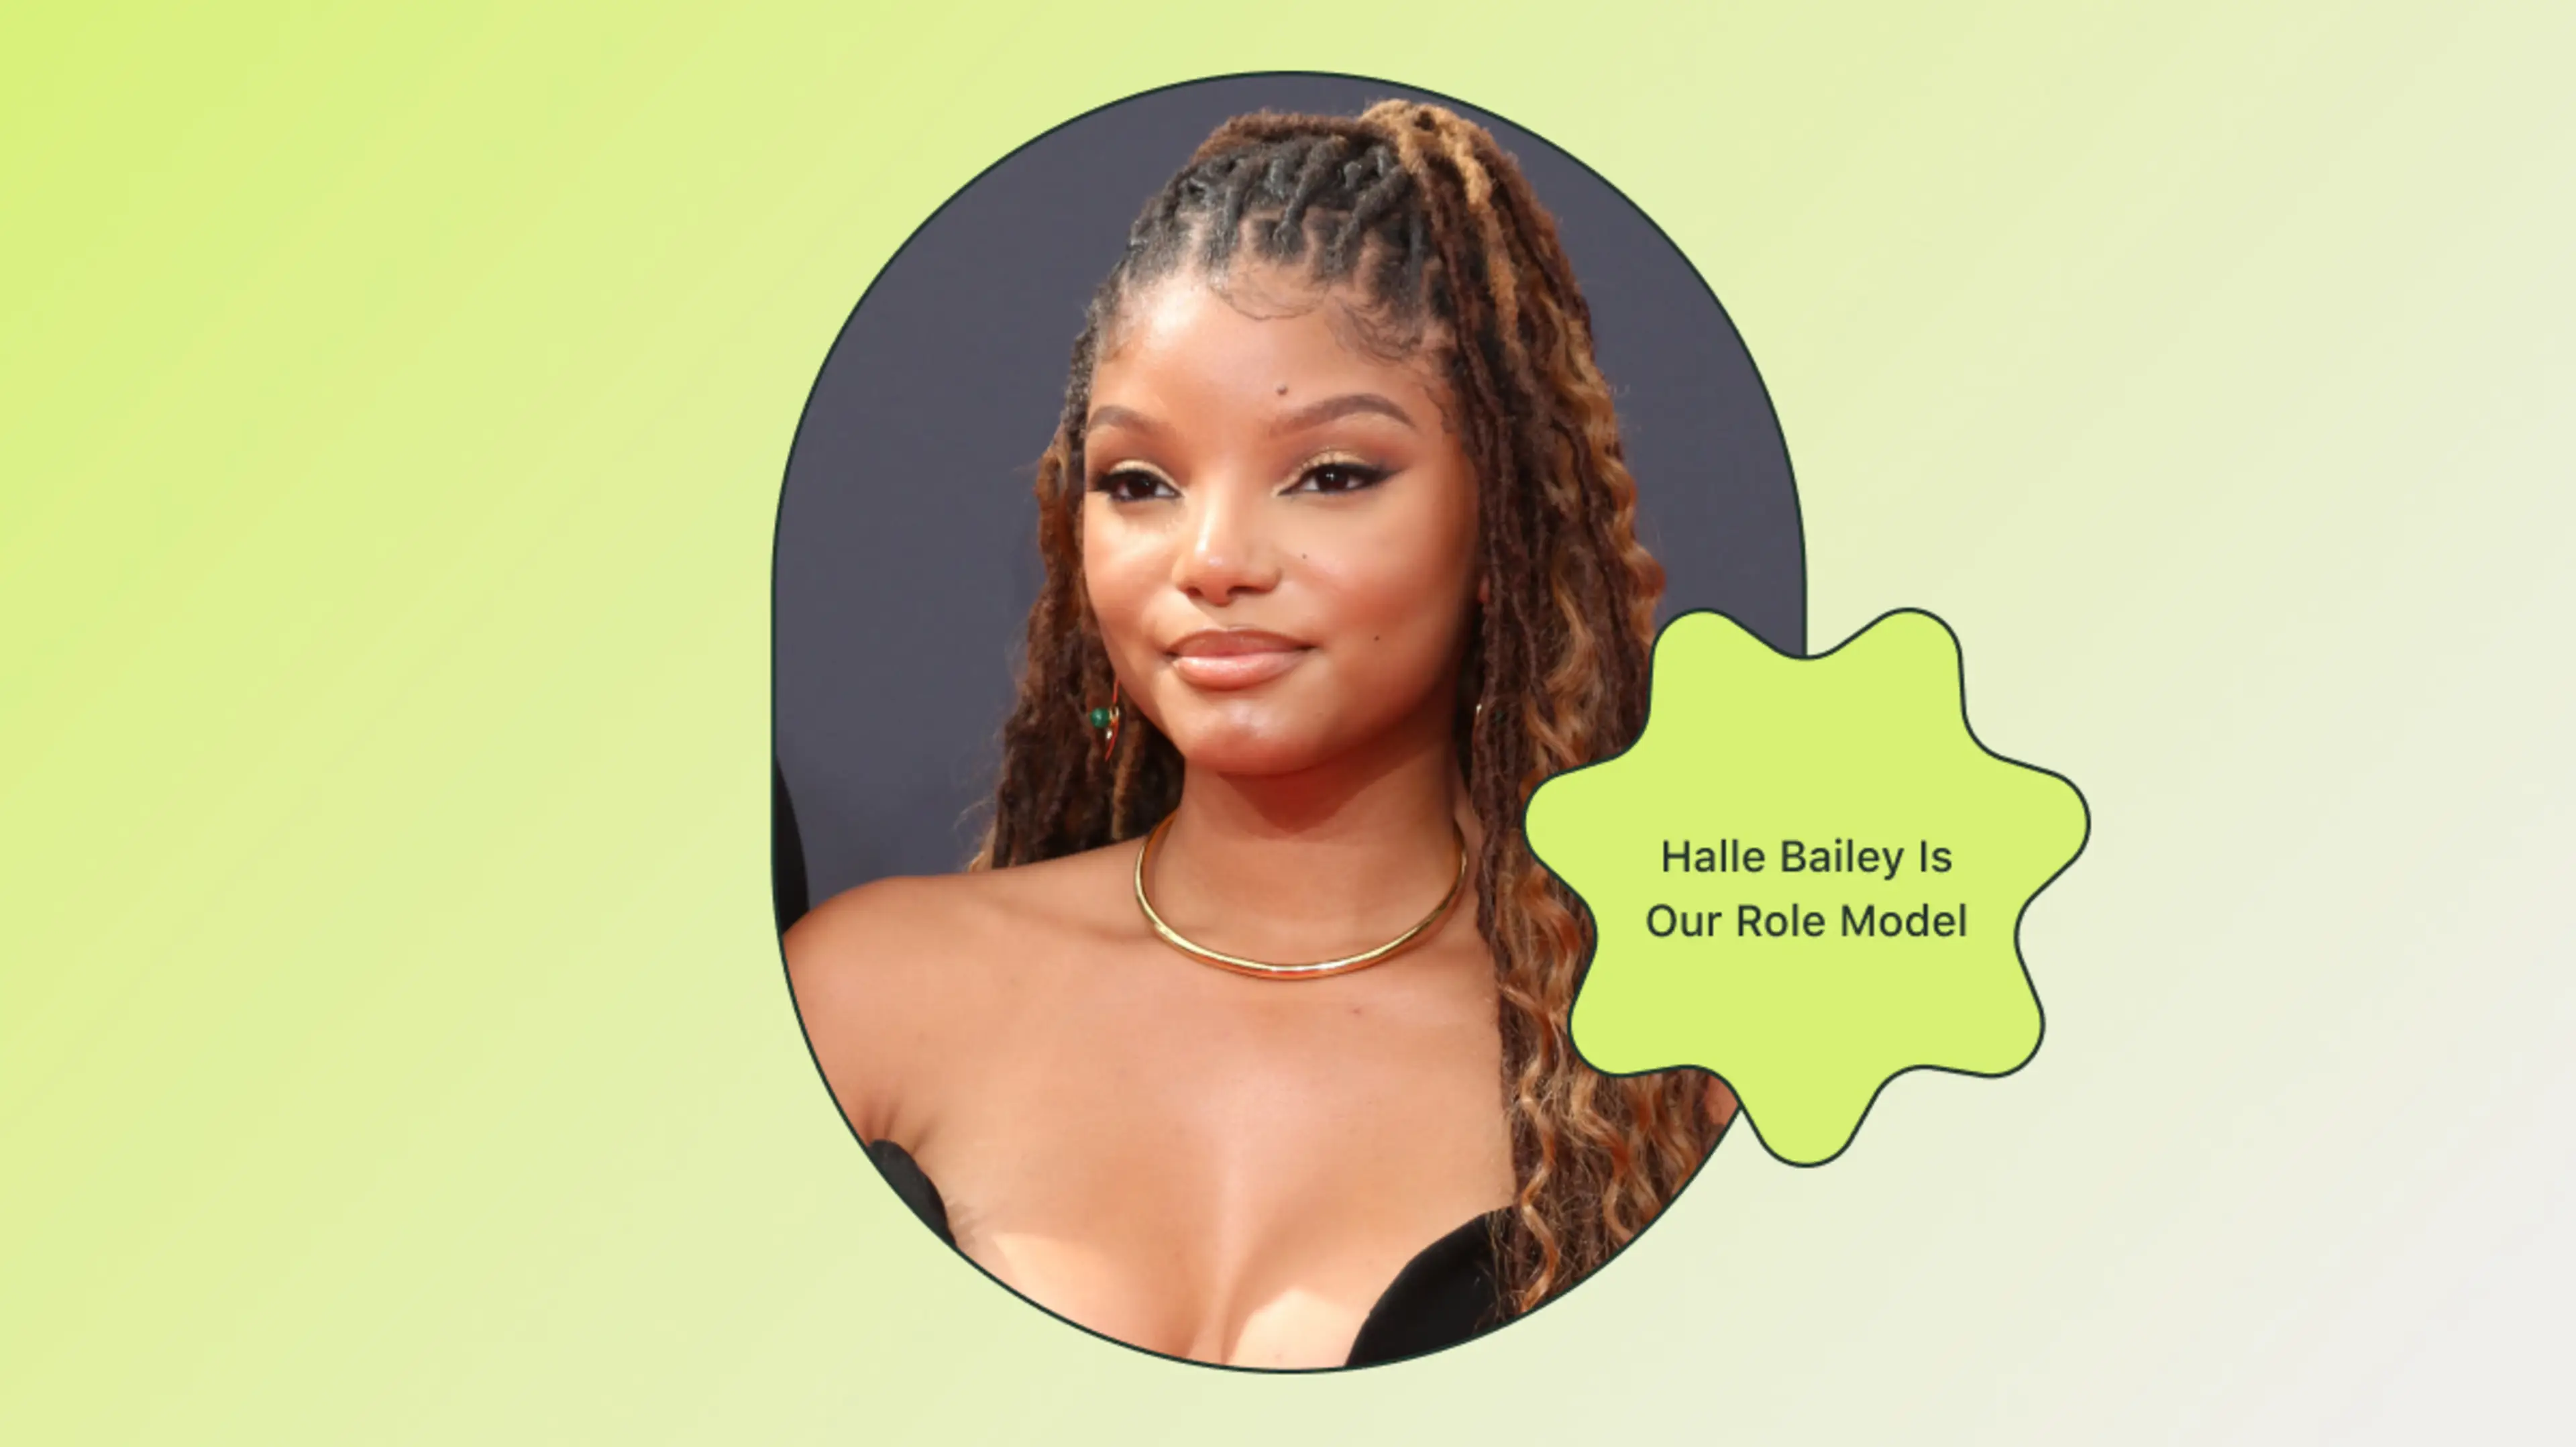 Halle Bailey’s (Lack of a) Pregnancy Announcement Has Empowered Us - article body